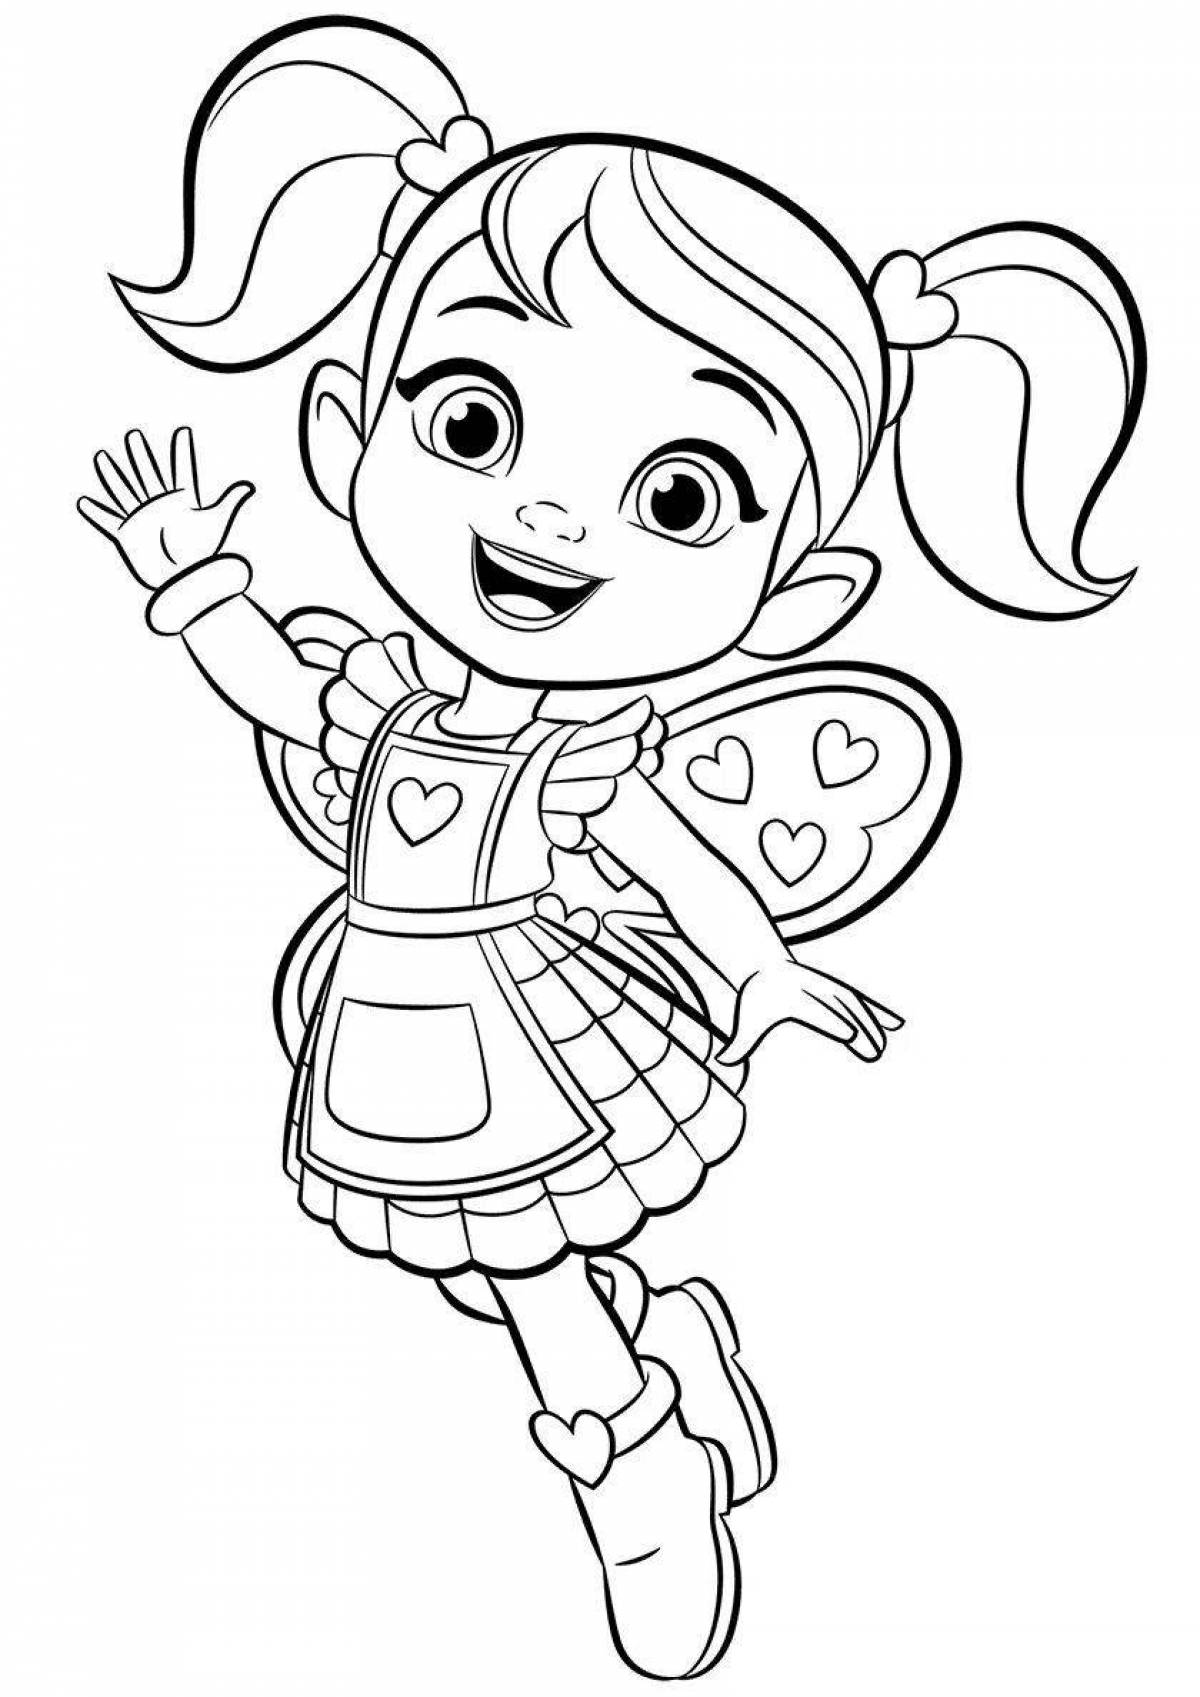 Radiant cafe butterbean coloring page